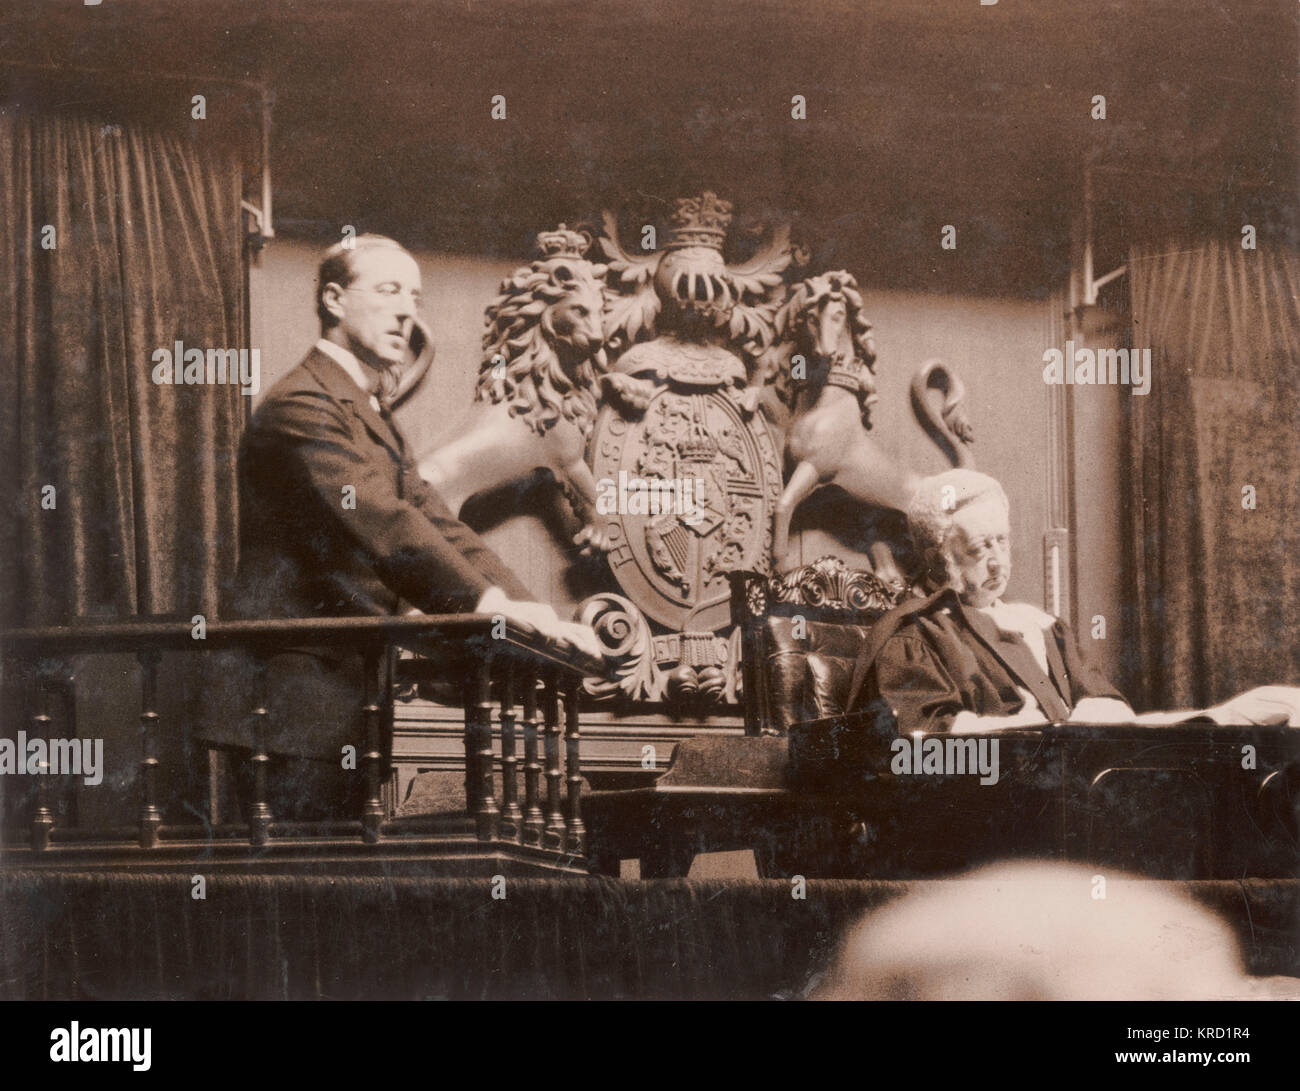 Lord Howard de Walden (Thomas Evelyn Scott-Ellis, 8th Baron Howard de Walden, 4th Baron Seaford, 1880-1946) in the witness box, giving evidence in the Lord Chief Justice's Court regarding his libel suit against Mr John Lewis of Oxford Street.  De Walden was the ground landlord of the John Lewis store, and the dispute was over his refusal to grant a lease to extend the store, as a result of which Lewis put up some mildly defamatory posters.  De Walden was eventually granted a farthing in damages.      Date: circa 1909 Stock Photo